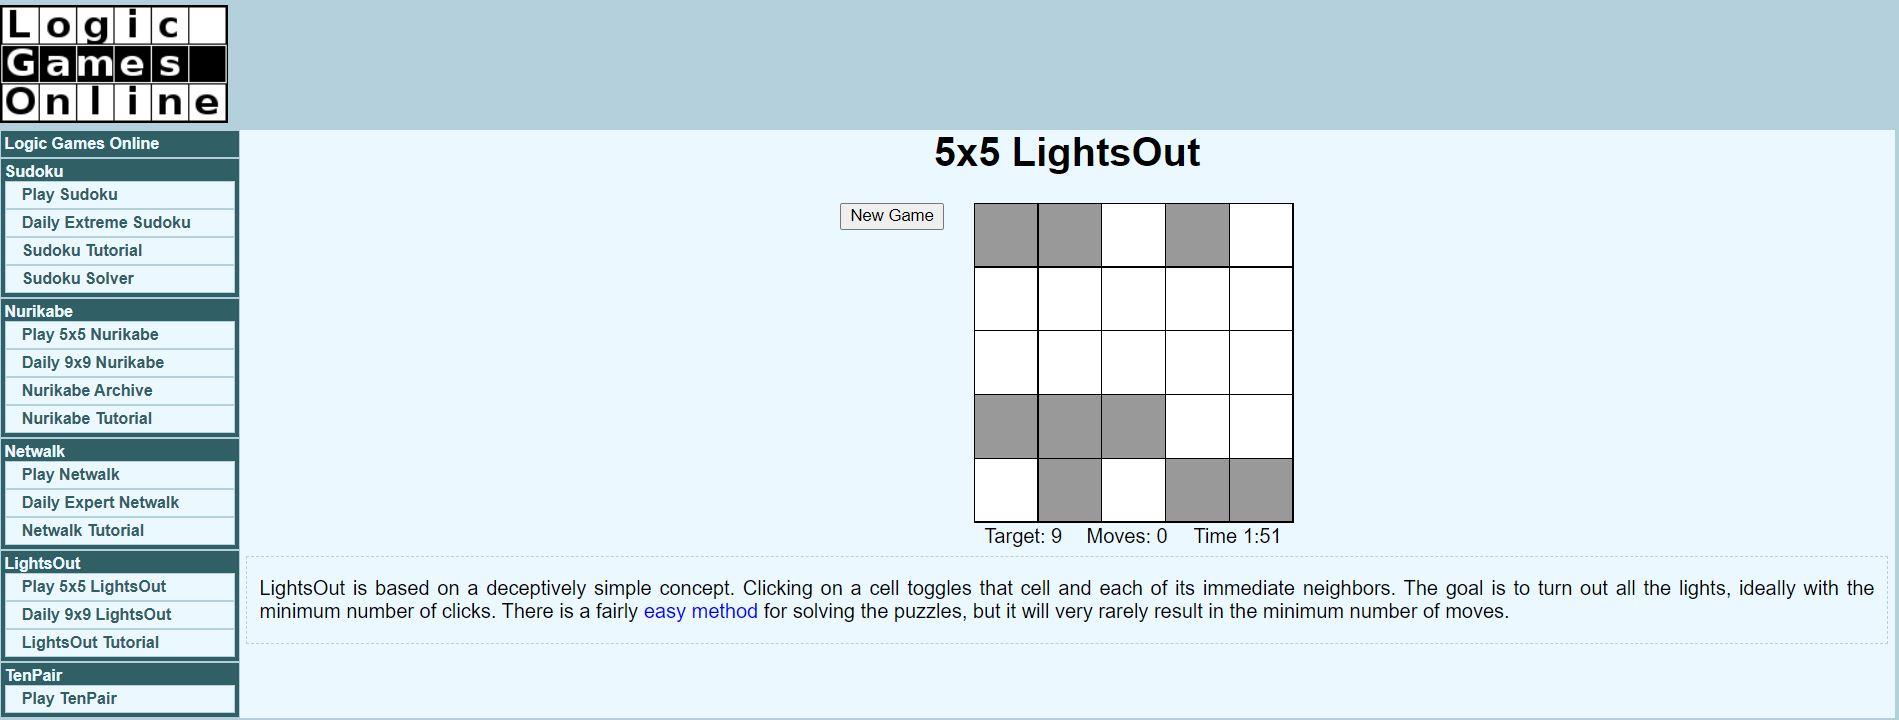 Sudoku Solver with HTML, CSS, and JavaScript